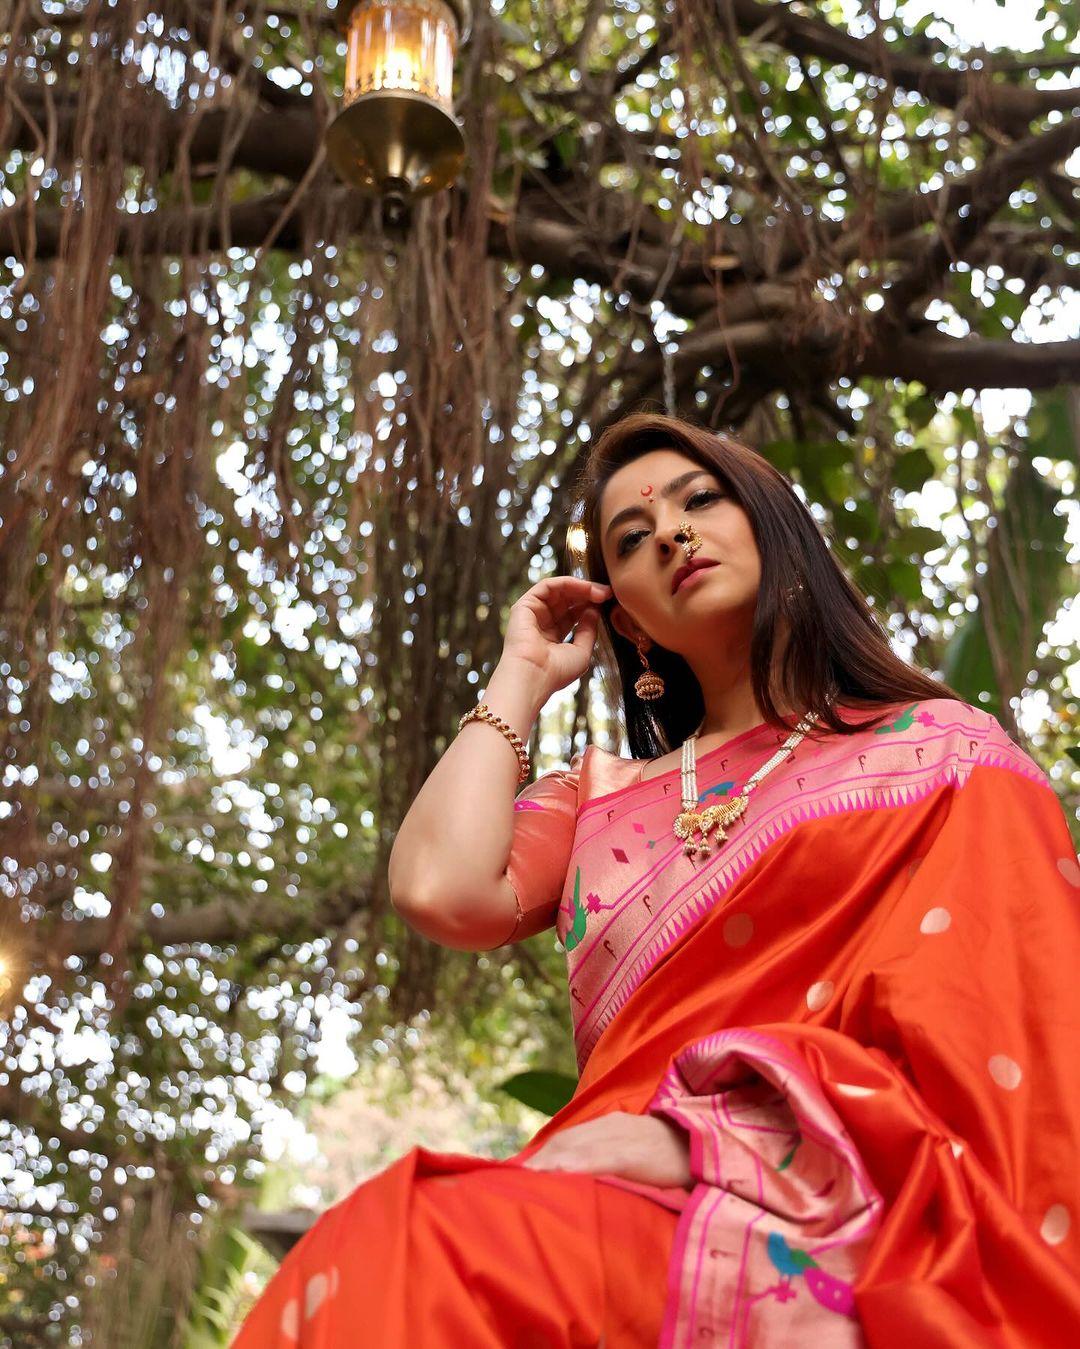 In this look, she wore an orange saree with a big pink border, which struck a balancing contrast. The actress left her hair open and put on minimal makeup